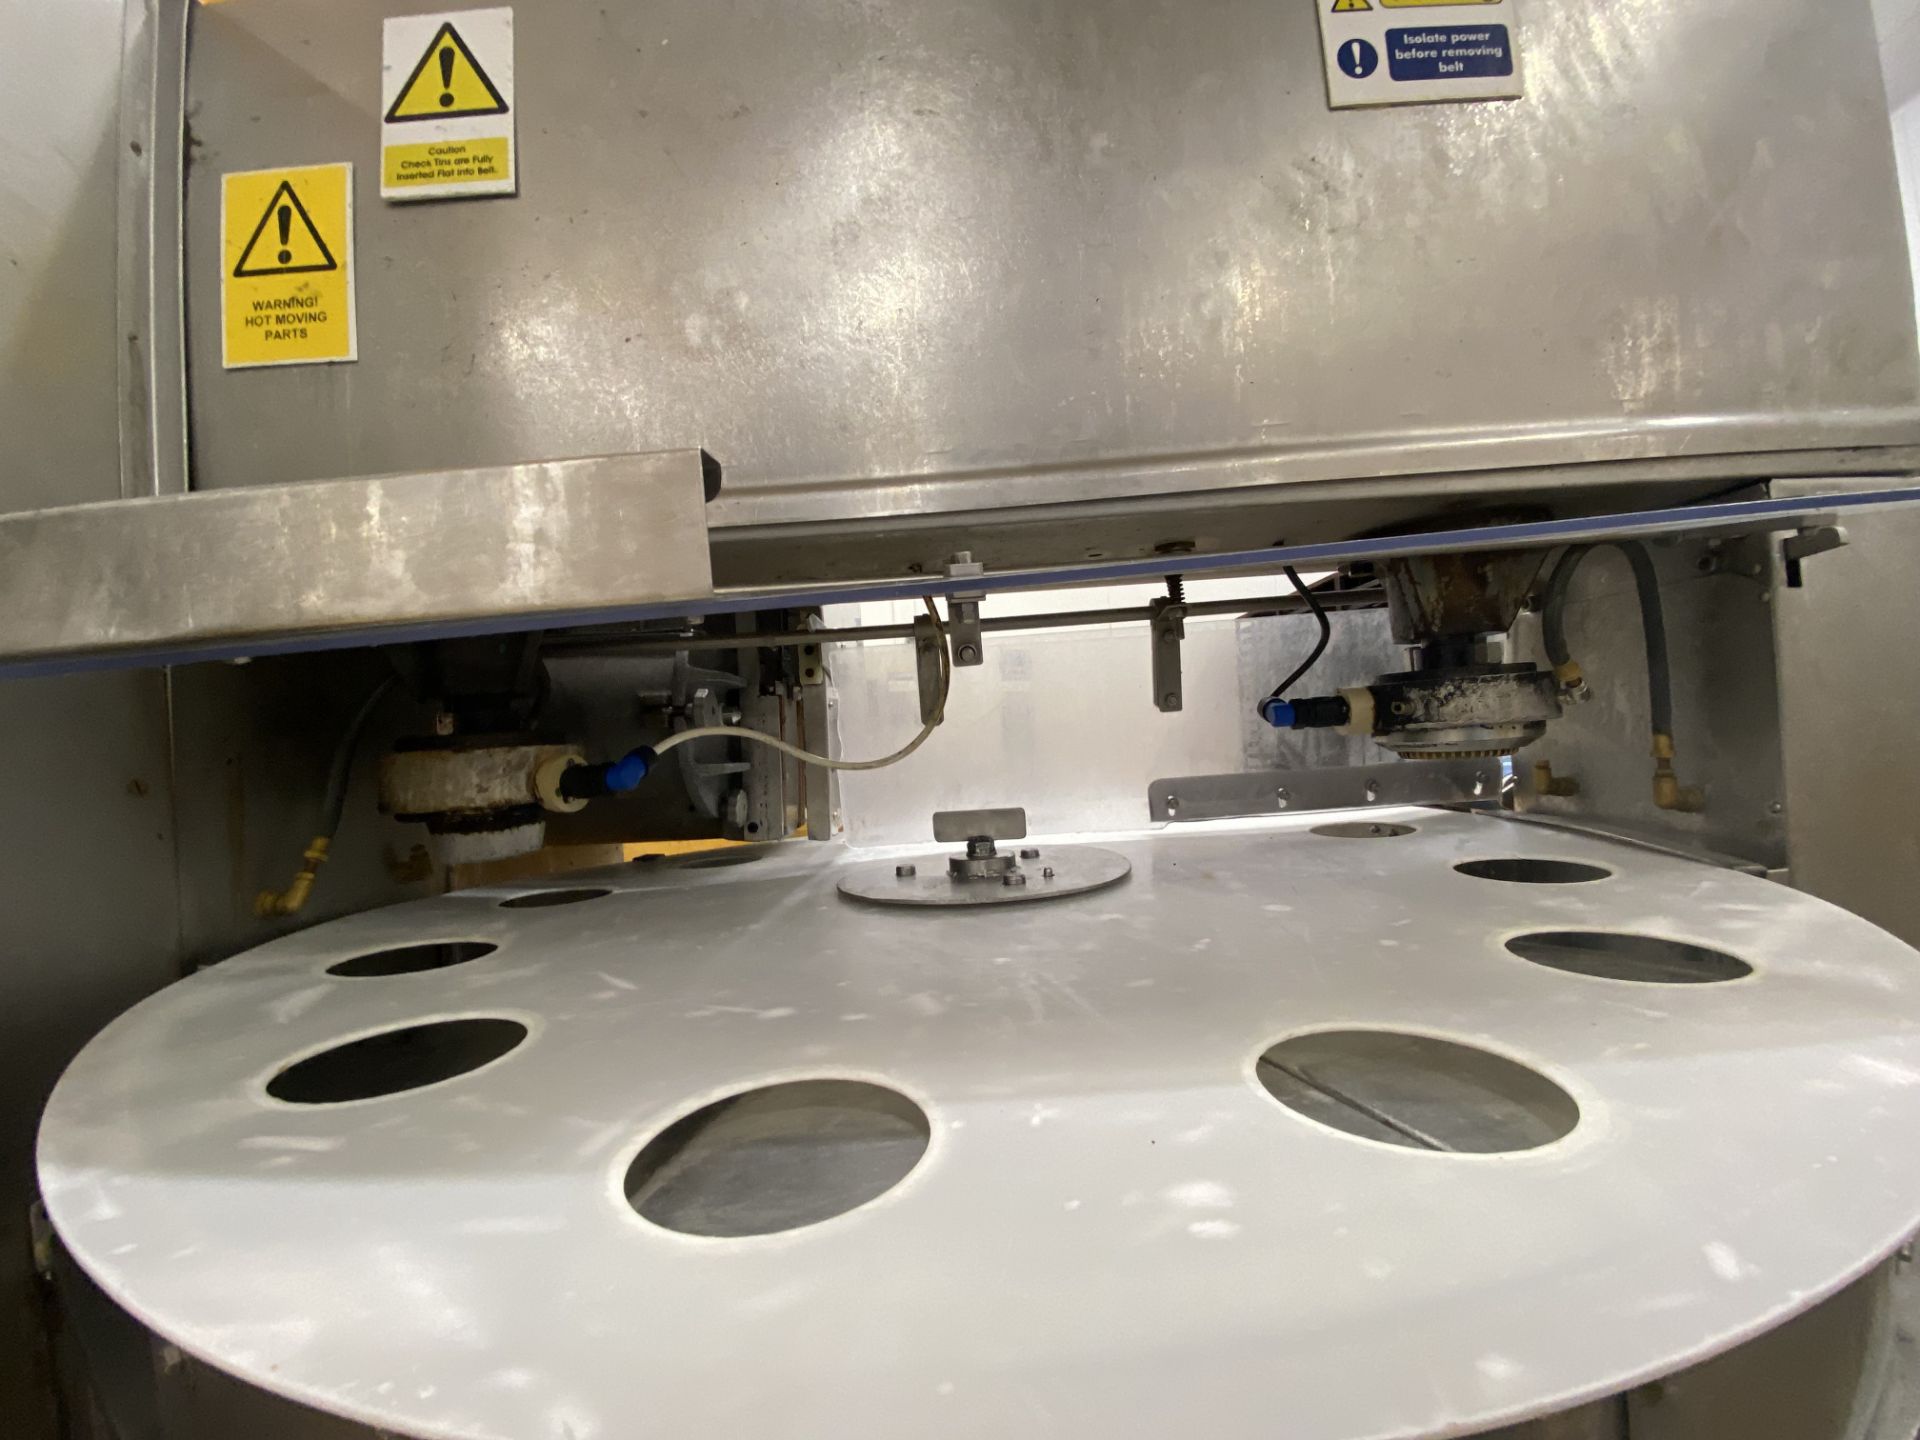 Big T ROTARY PIE FILLING & CRIMPING MACHINE (T4), with Orbiter pastry sheeter (S1), with stainless - Image 10 of 13